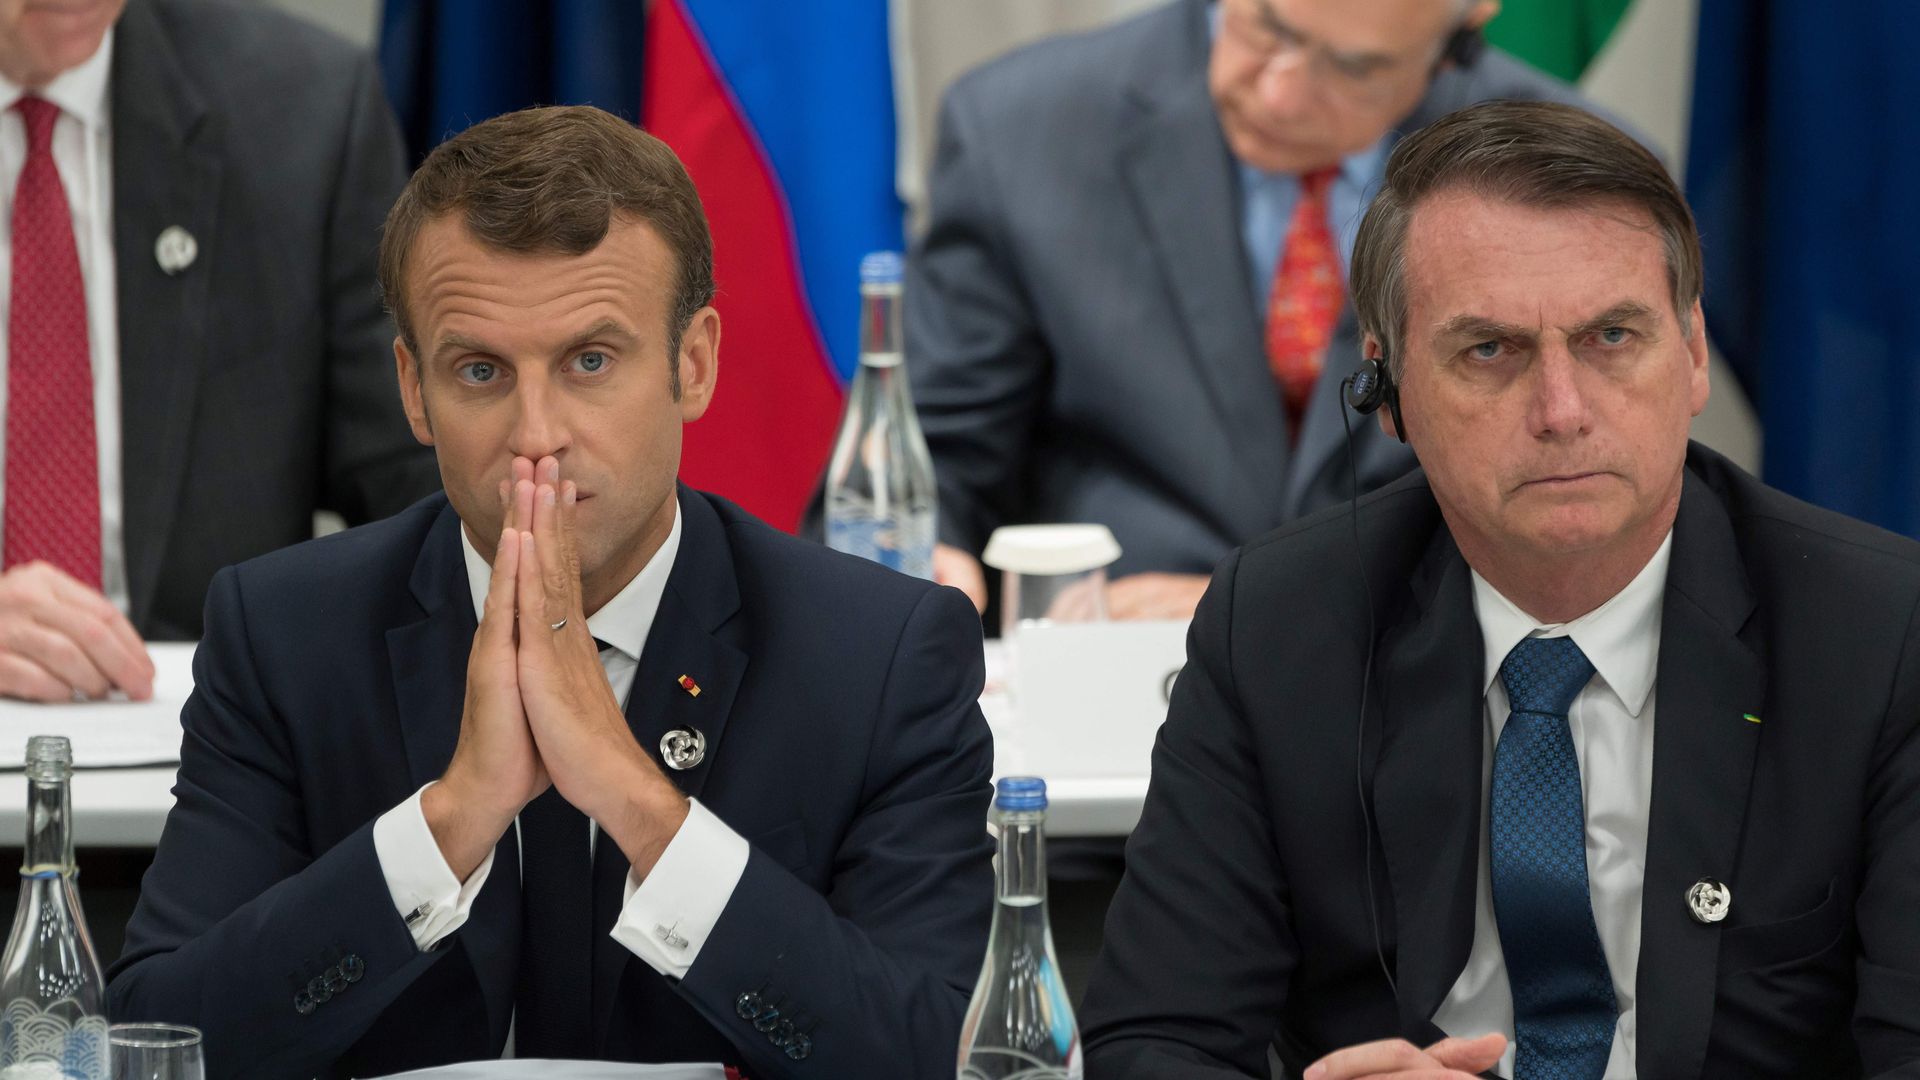 France's President Emmanuel Macron (L) and Brazil's President Jair Bolsonaro attend a meeting on the digital economy at the G20 Summit in Osaka on June 28, 2019. 